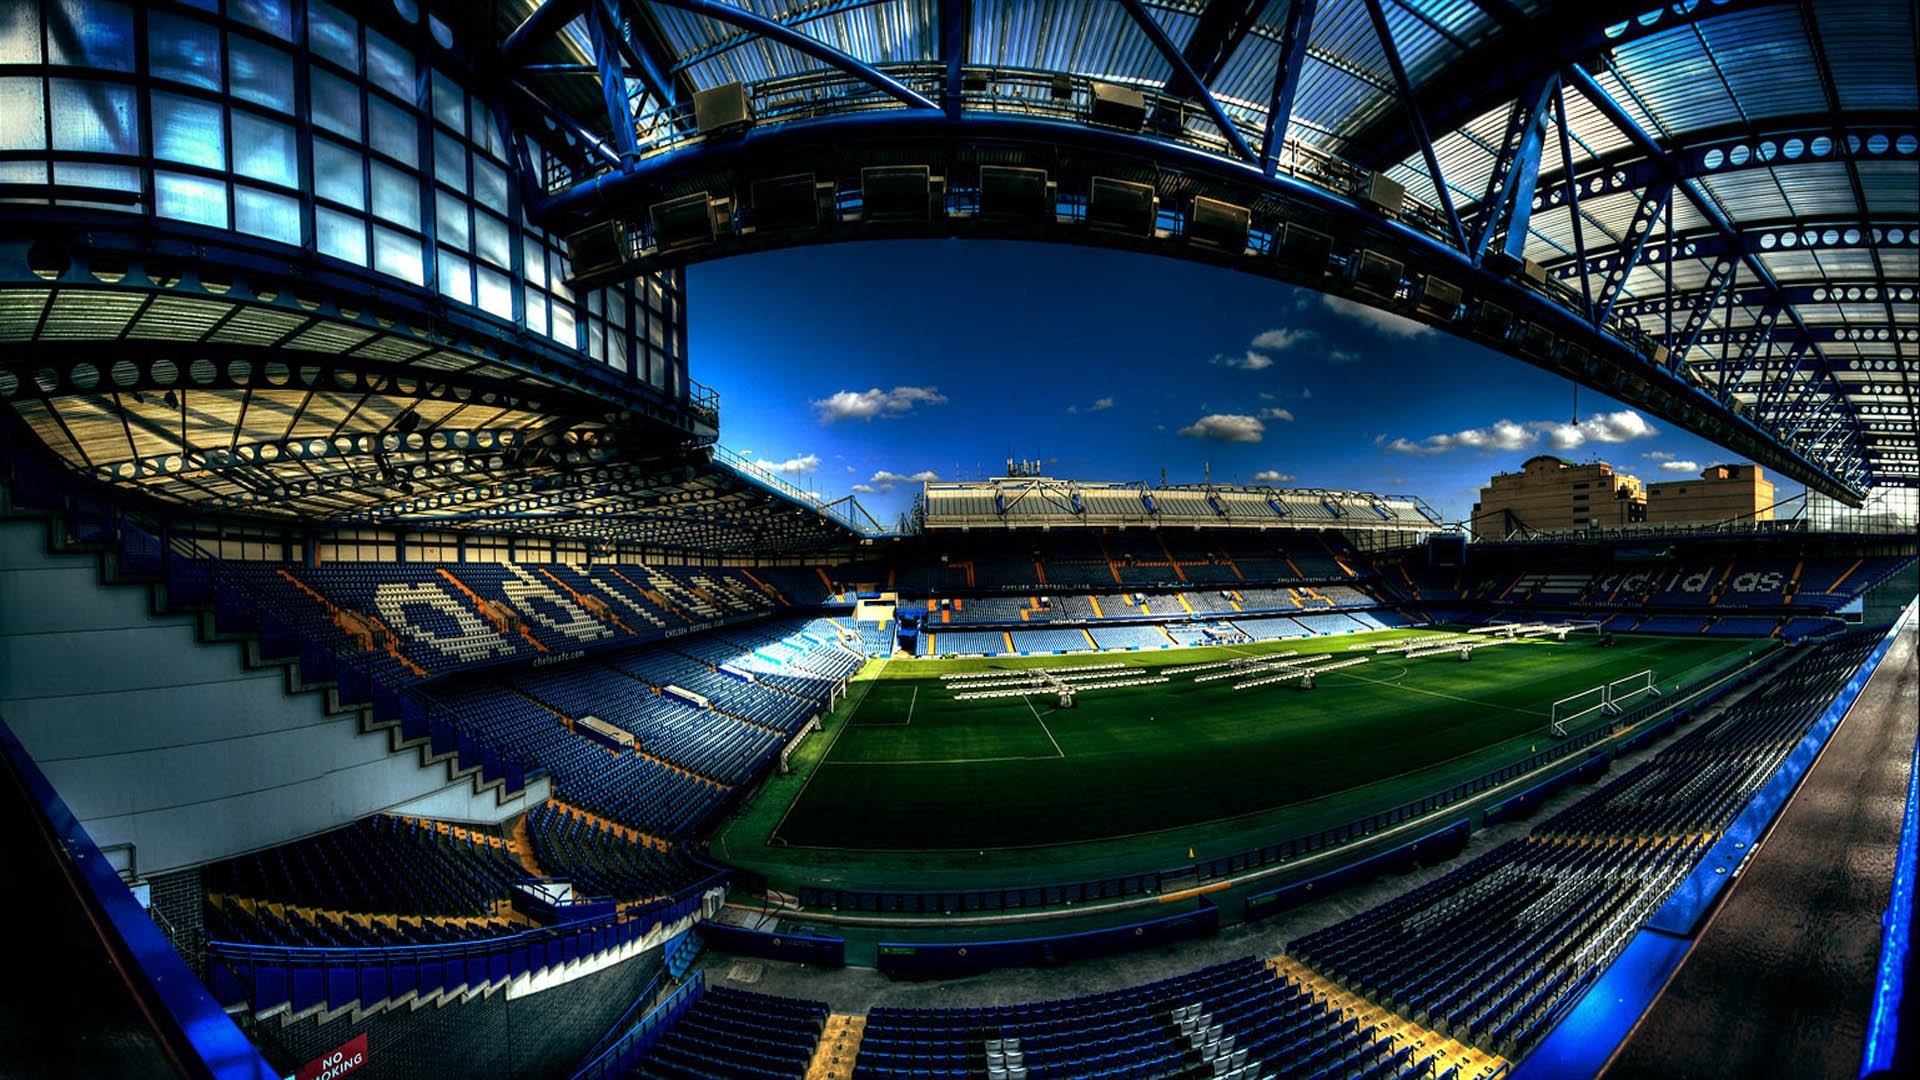 Chelsea: The eleventh largest football stadium in England, Home ground. 1920x1080 Full HD Wallpaper.